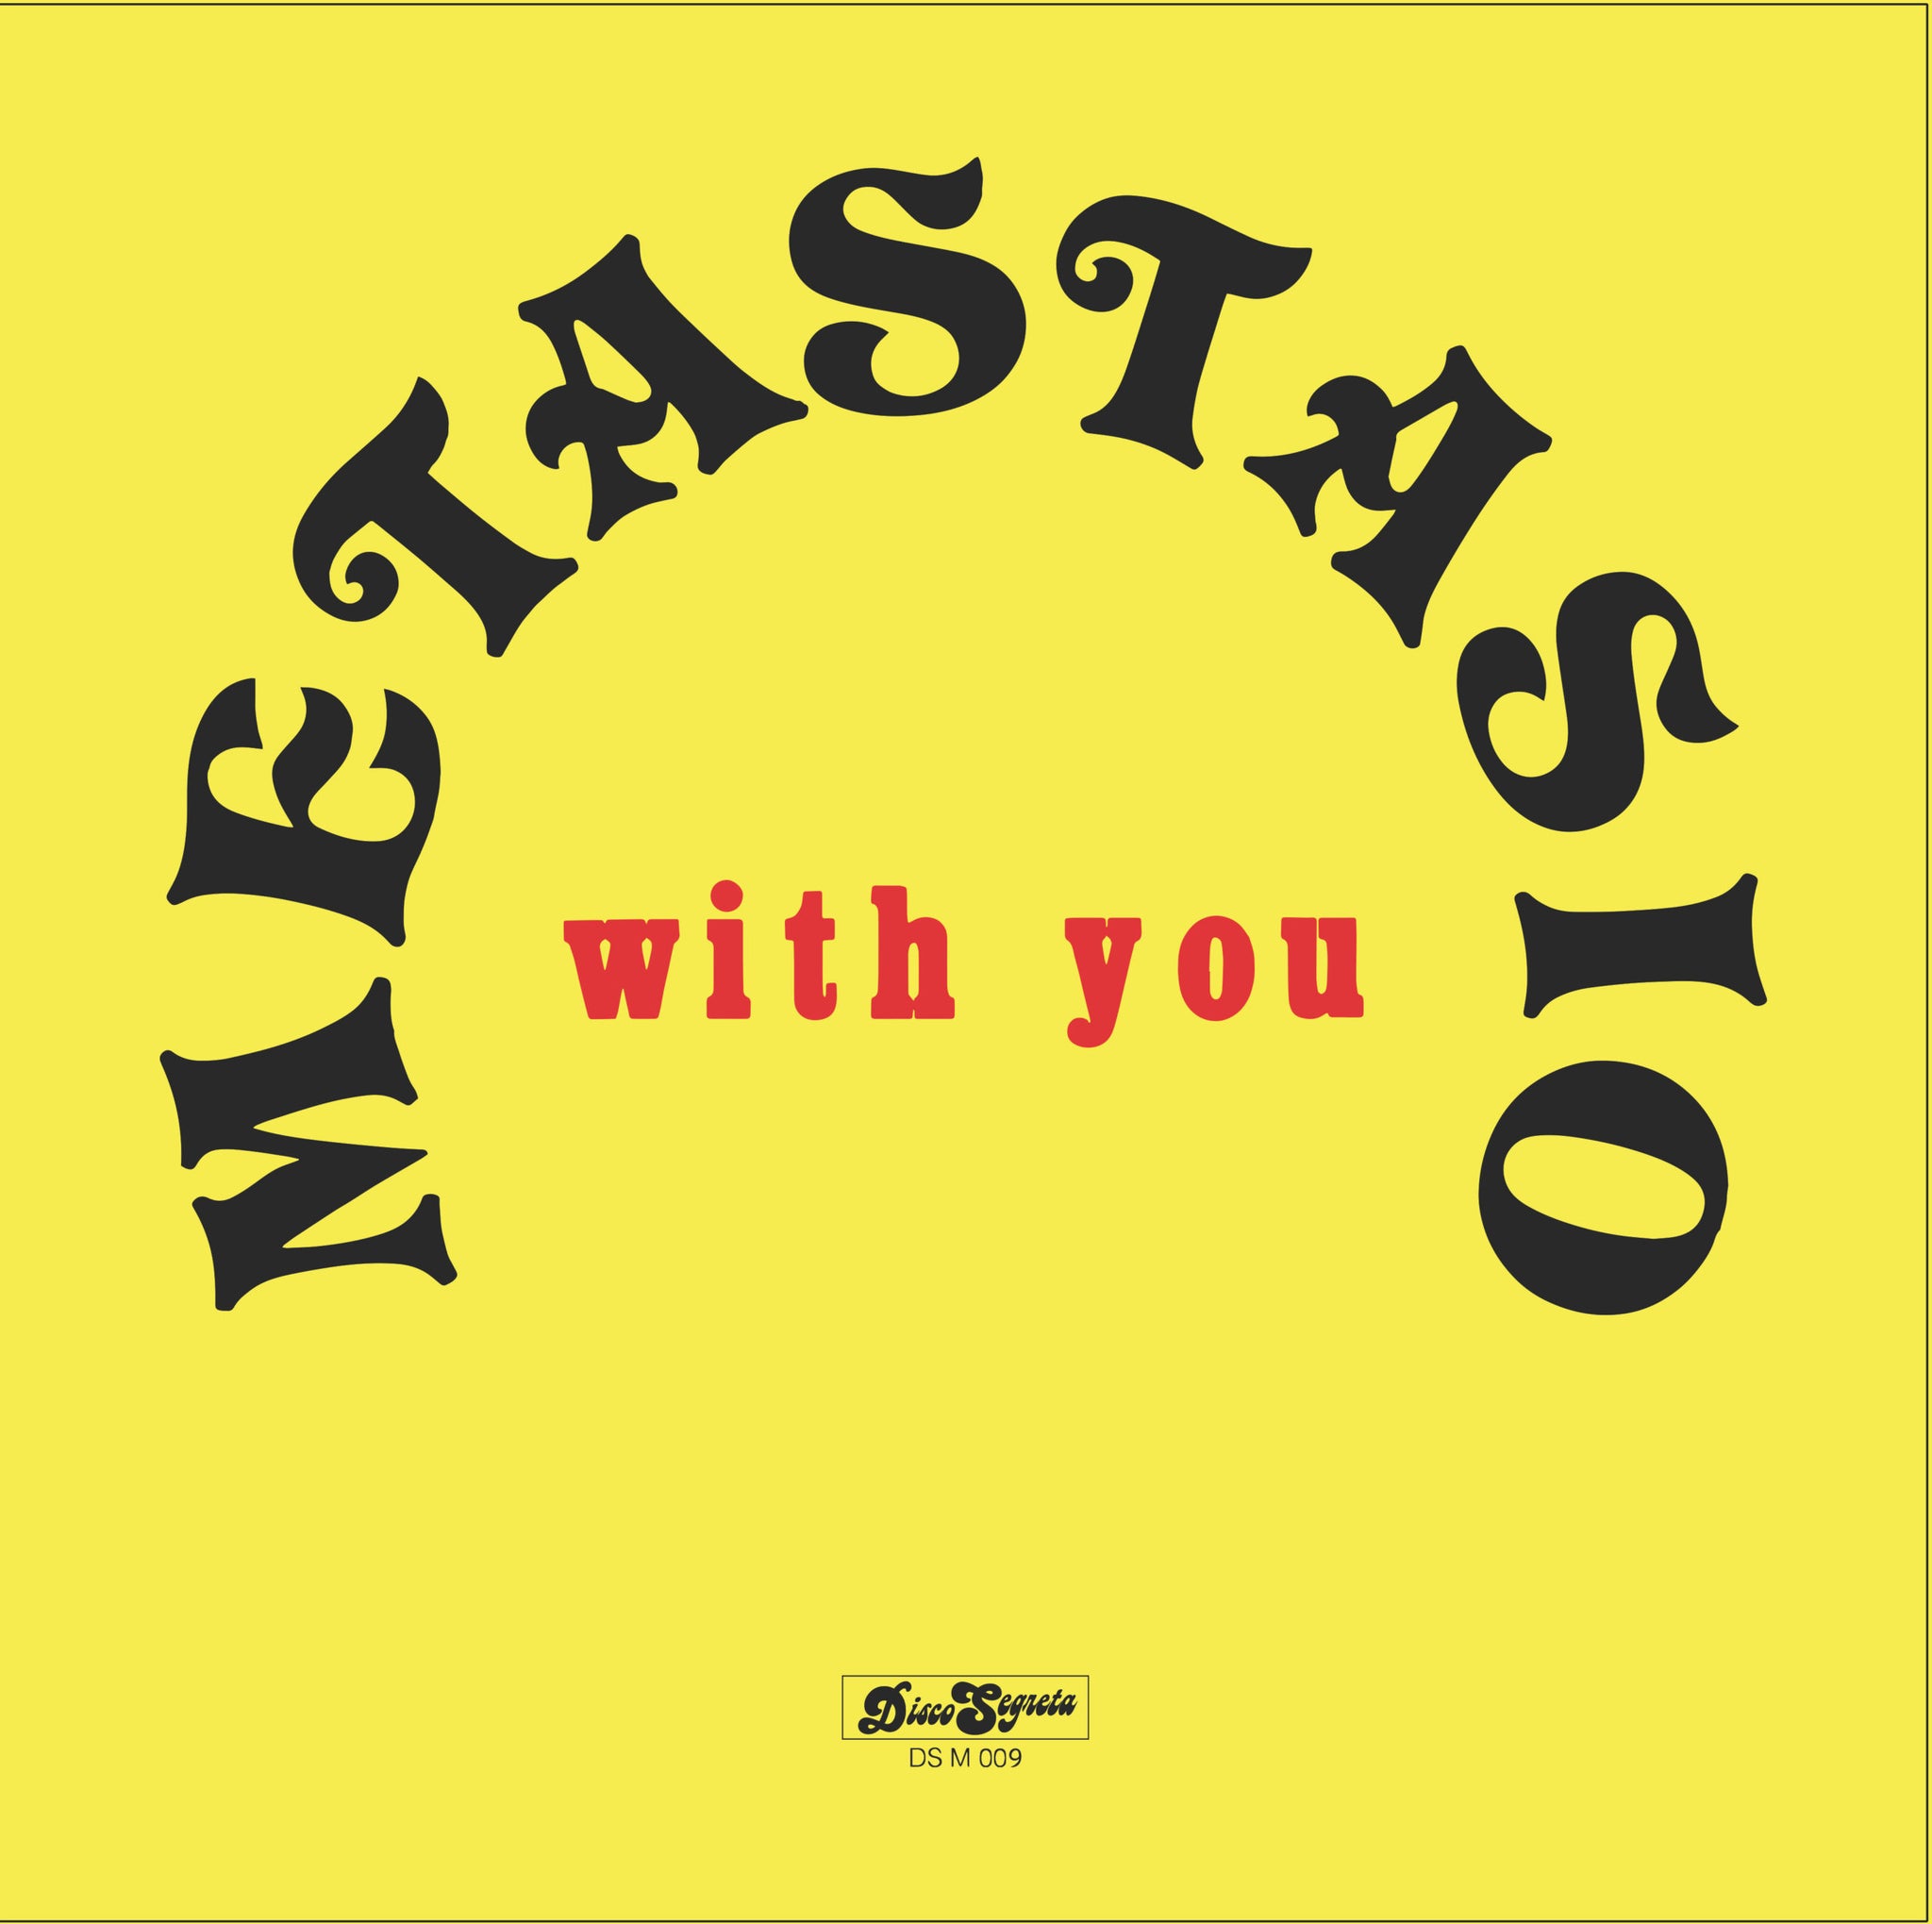 DS M 009 - Metastasio - With You